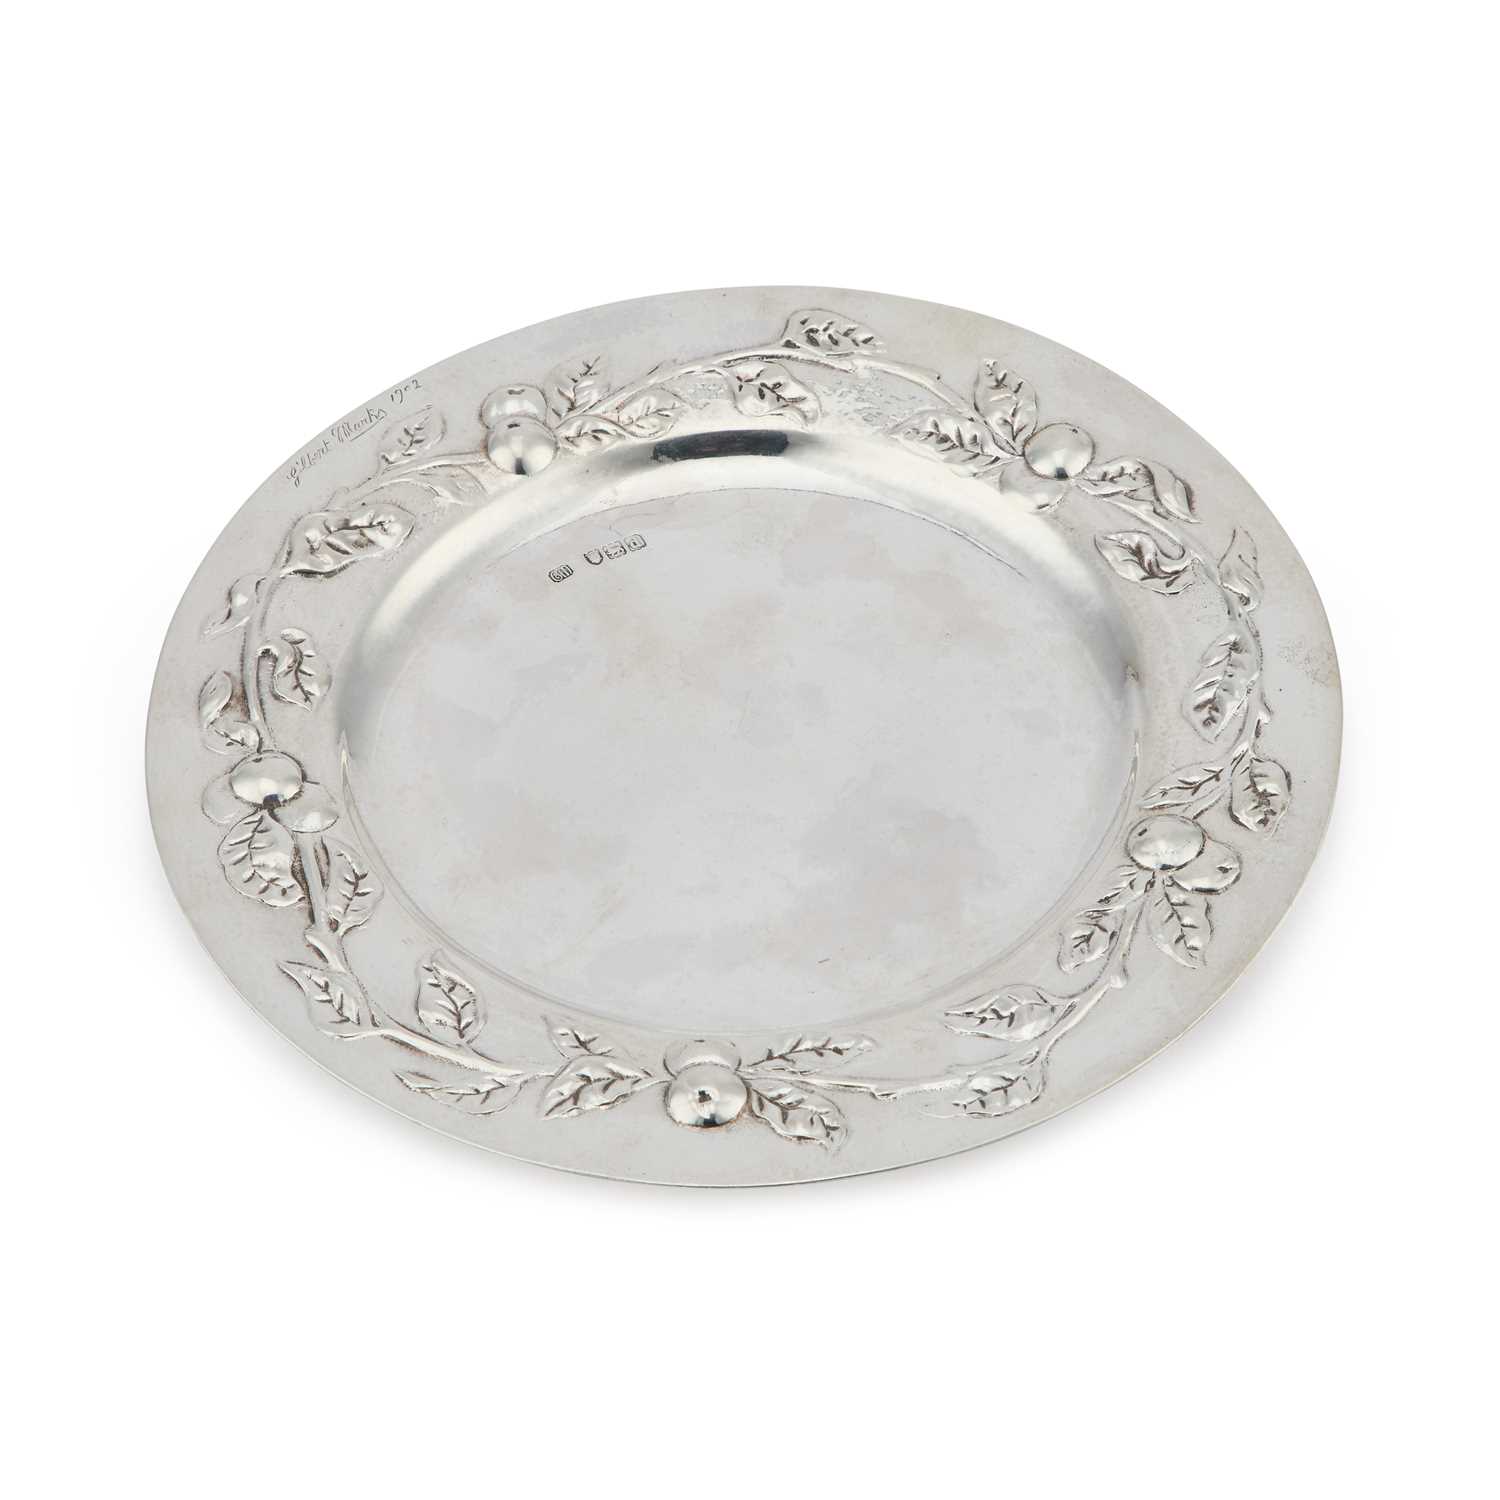 GILBERT MARKS (1861-1905), AN ARTS AND CRAFTS SILVER PLATE